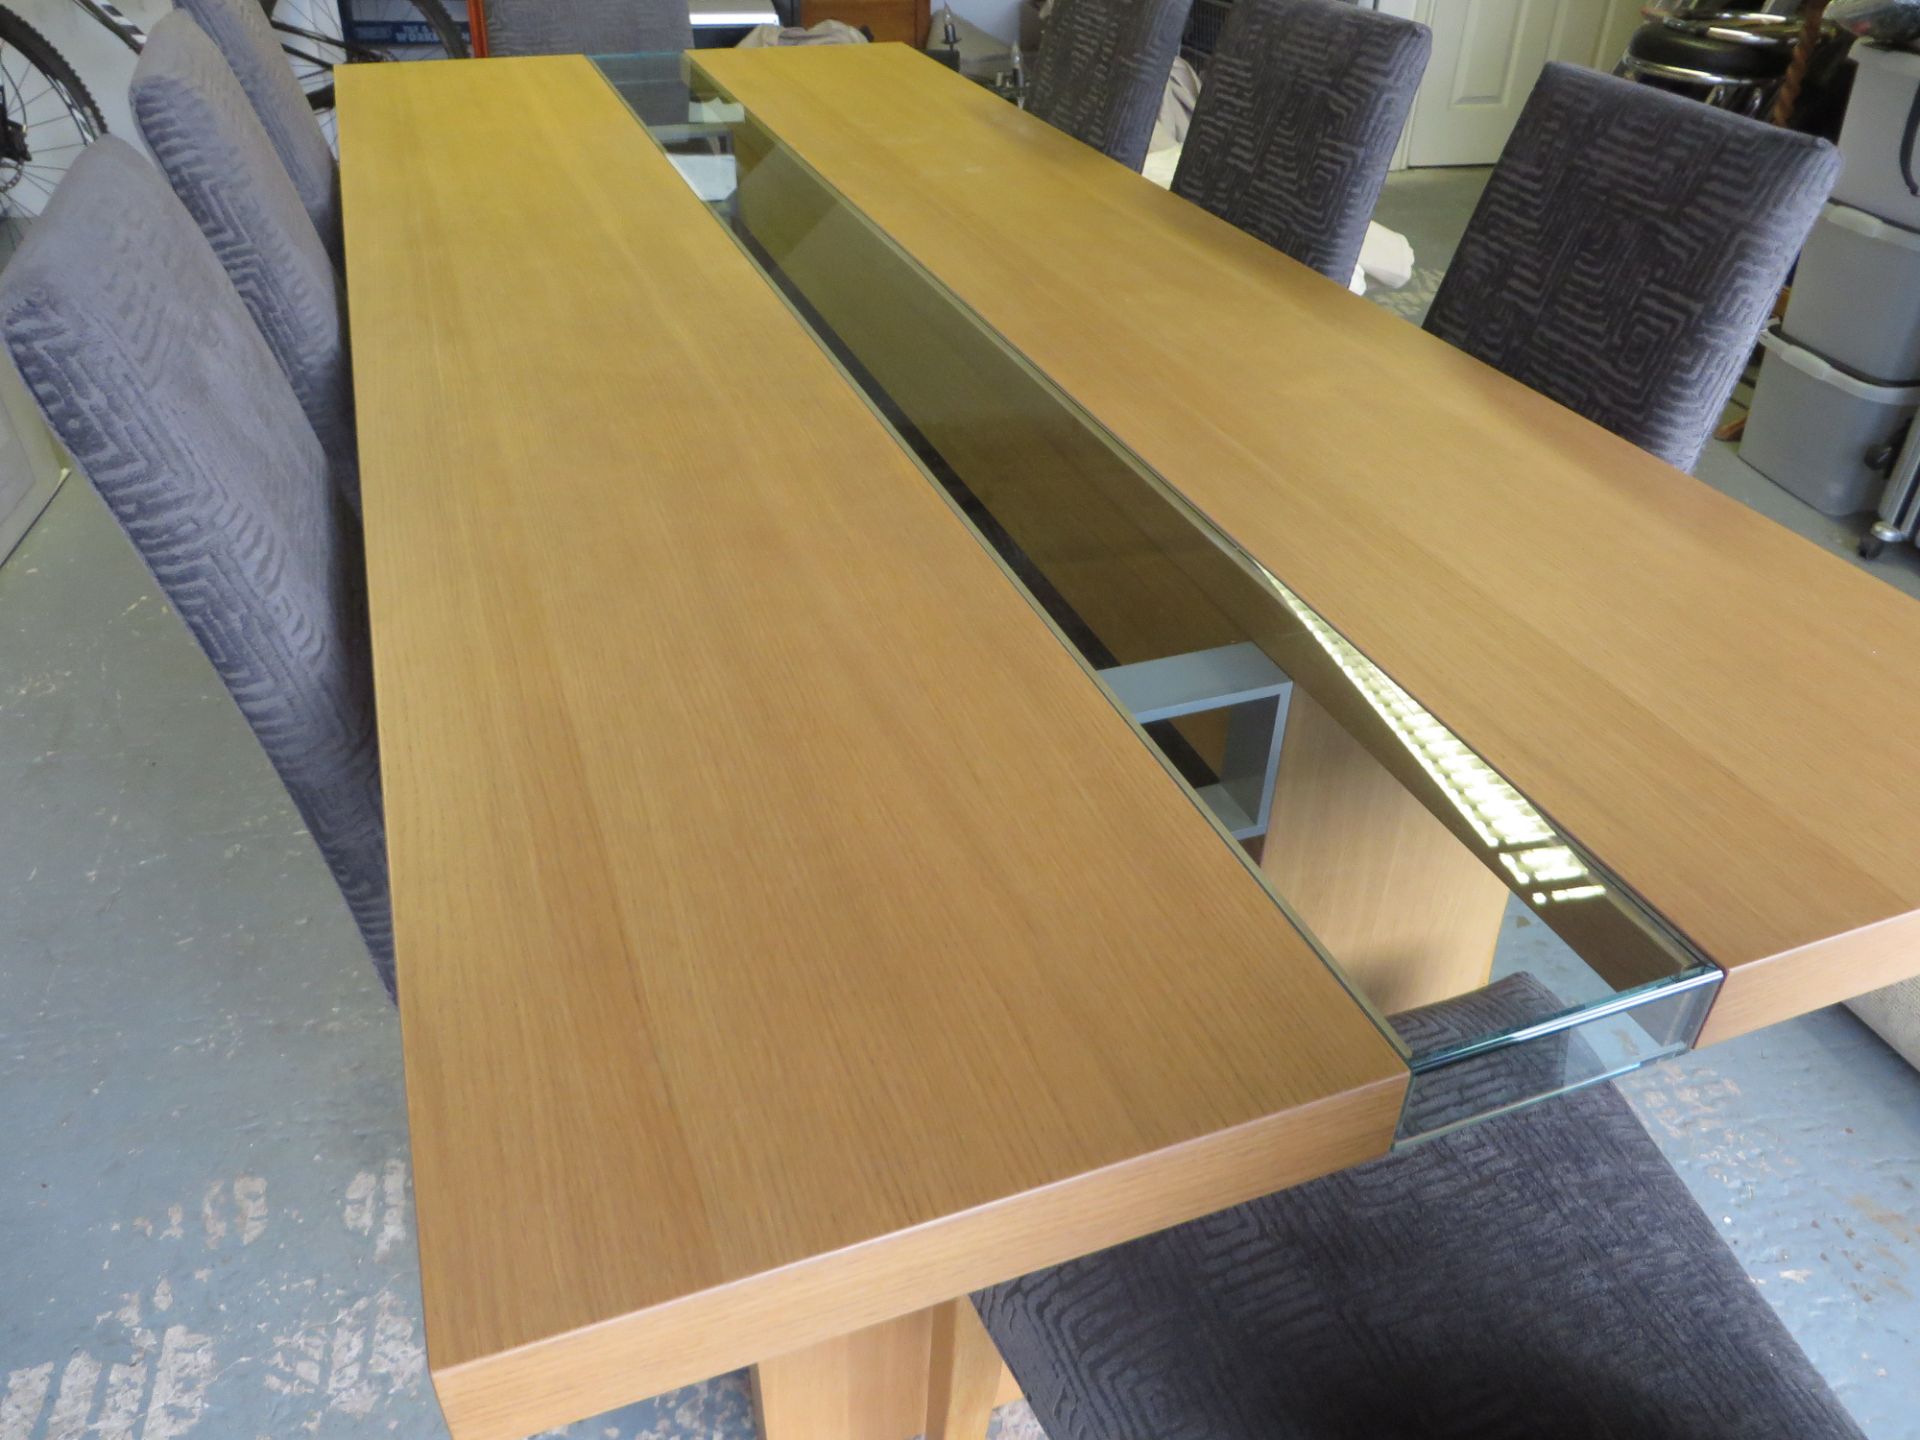 1 x Natural Oak Bross Ritz Dining Table and 8 Ligne Roset Dining Chairs - All in Excellent Condition - Image 3 of 9